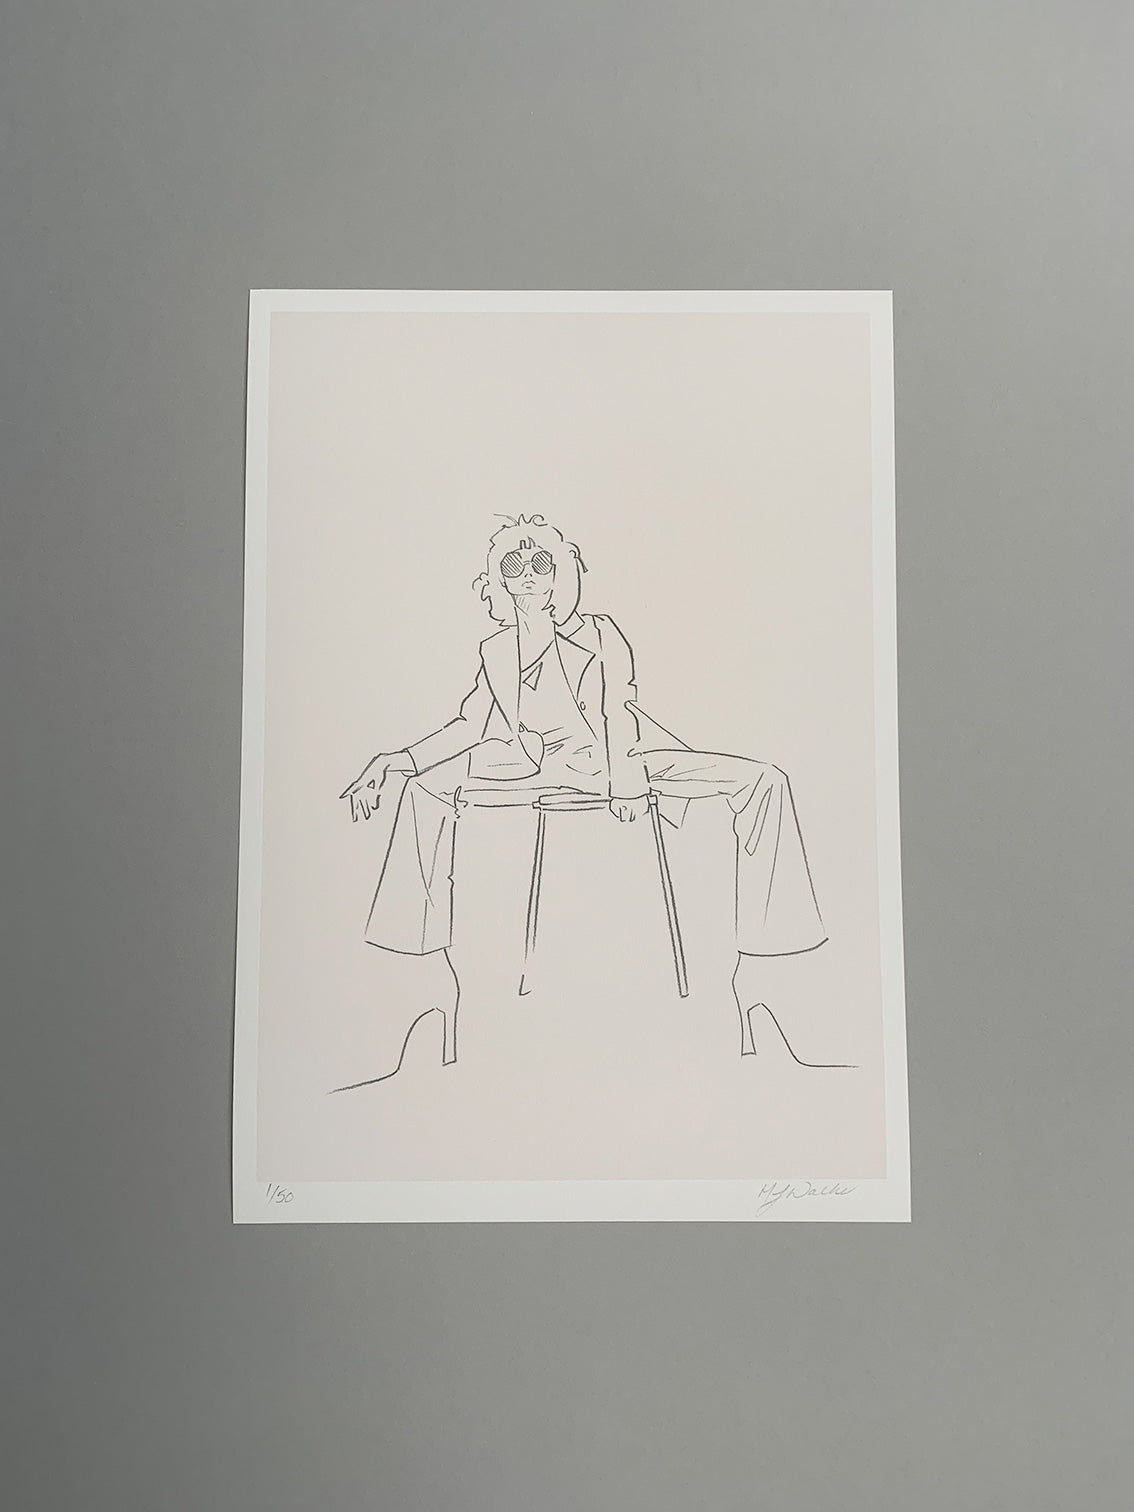 Charcoal sketch of a fashion model sitting on a stool on a grey background.